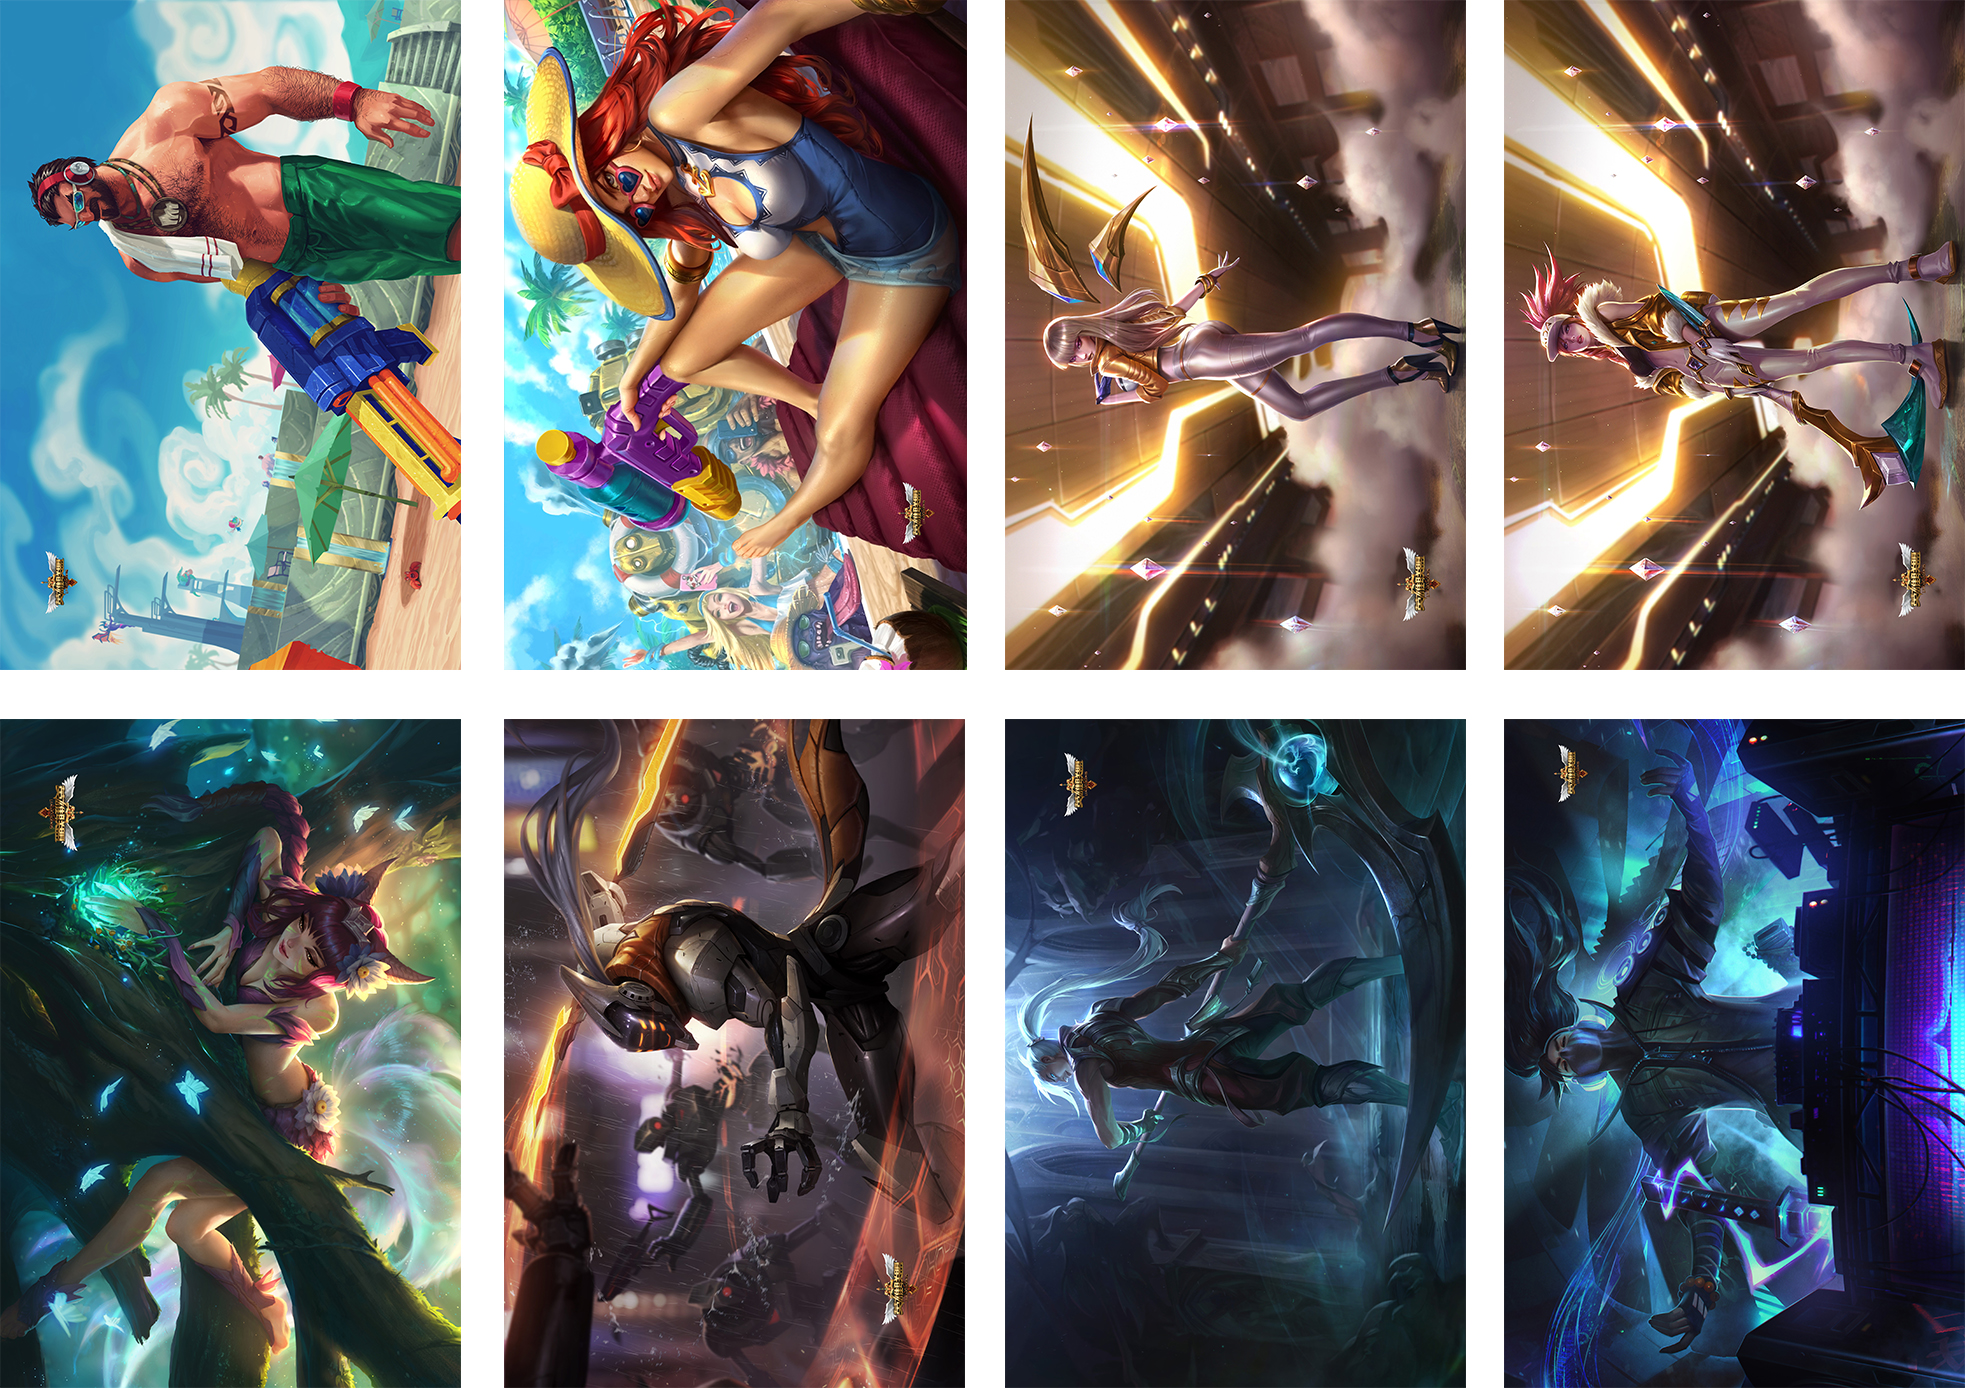 League of legends anime  posters price for a set of 8 pcs